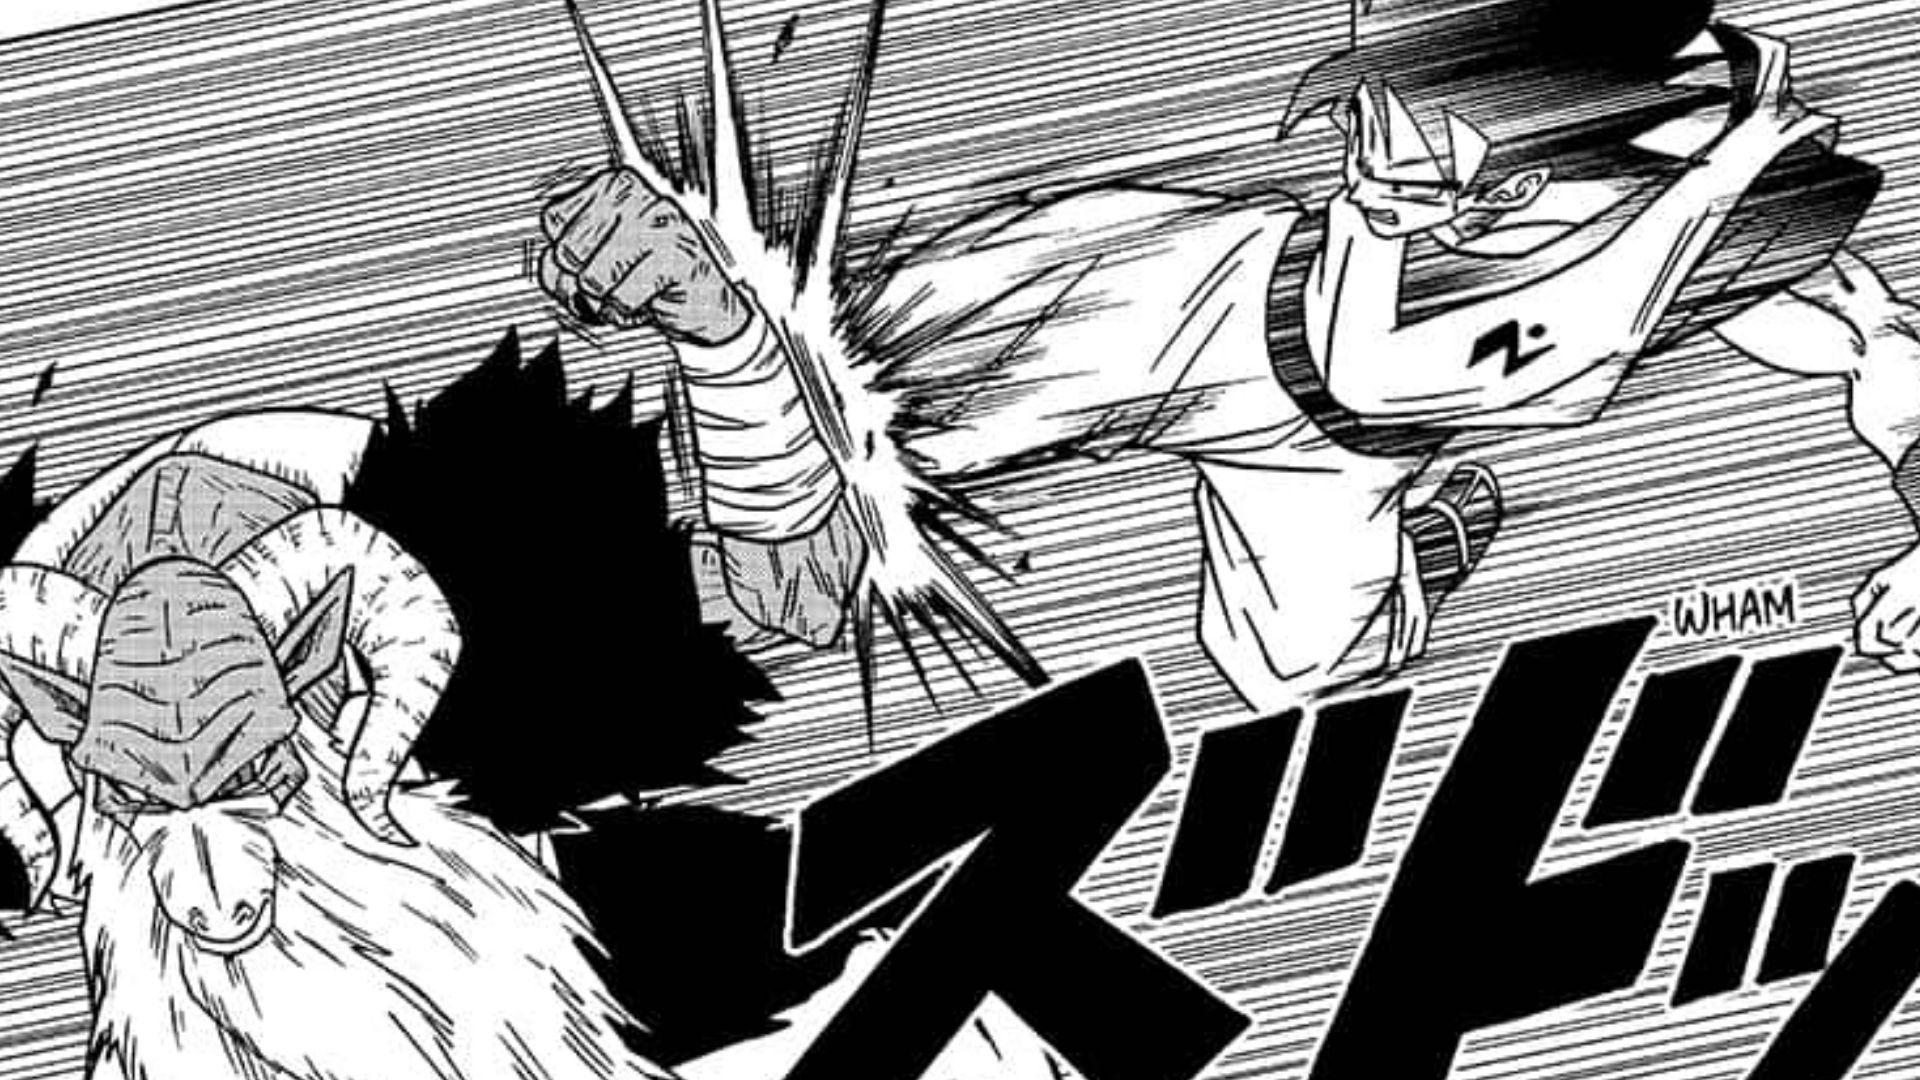 Want More Dragon Ball Super? The Manga has 7 Chapters Following The Tournament of Power ...